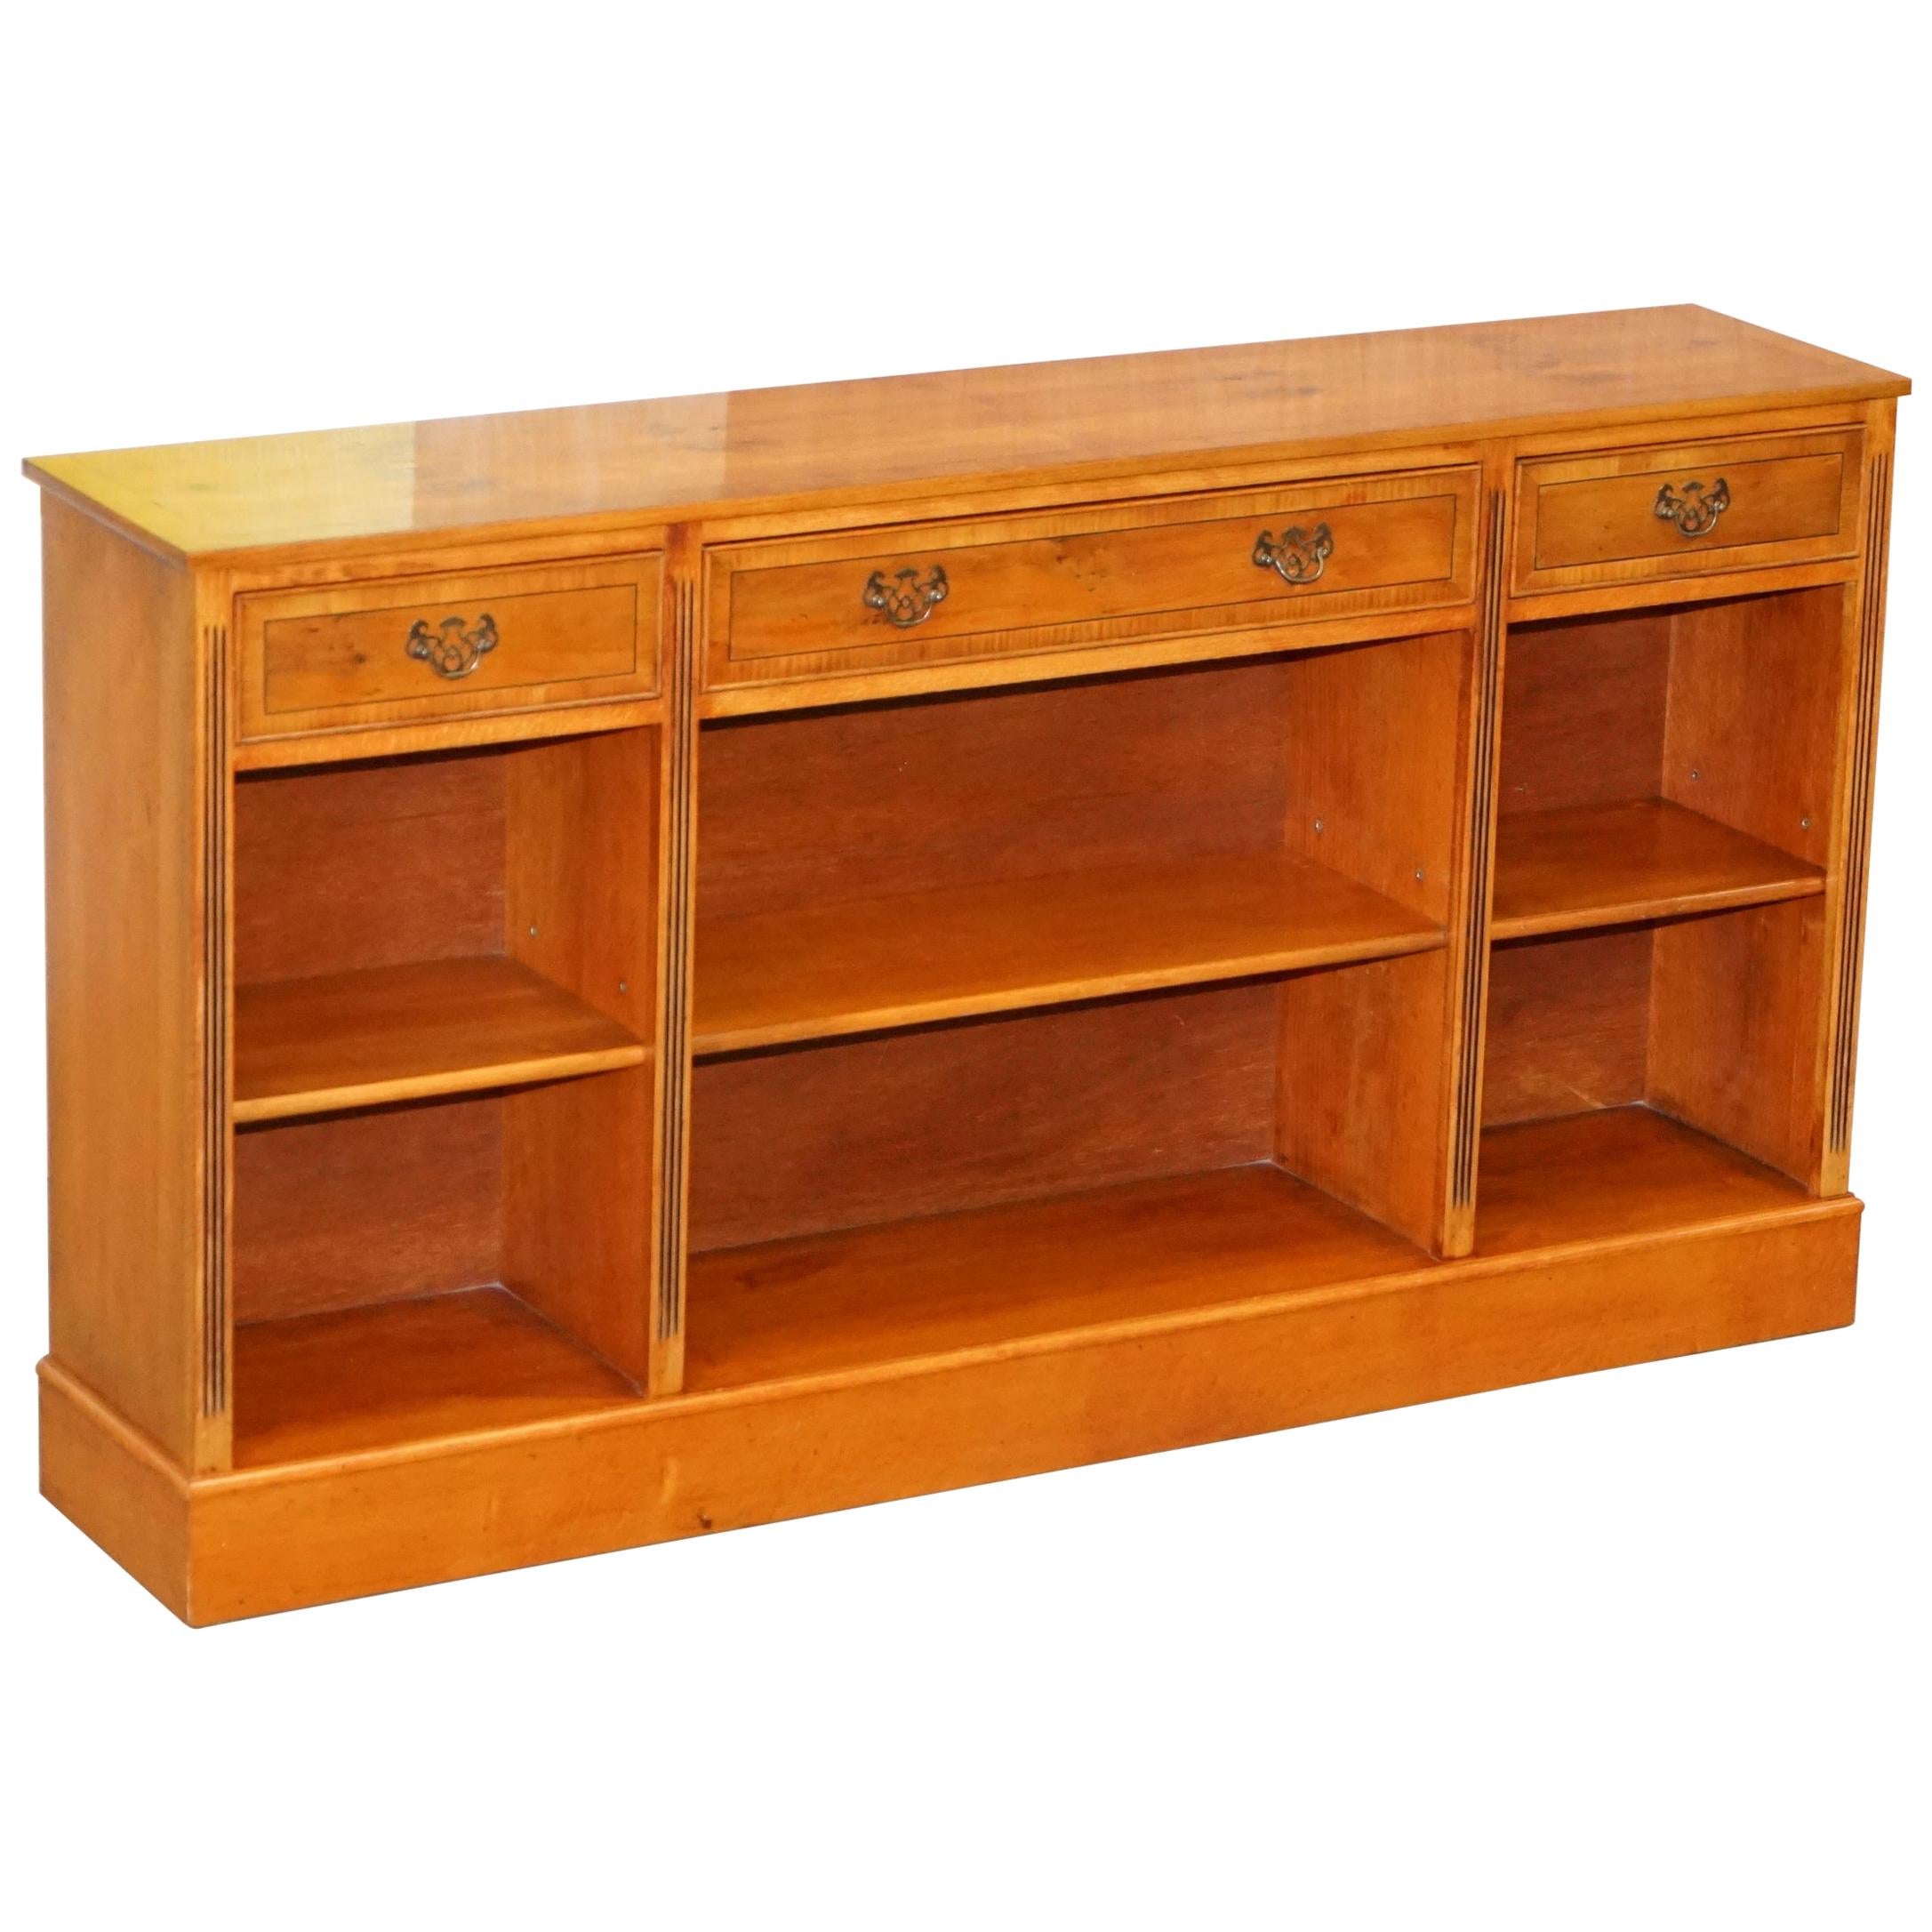 Stunning Burr Yew Wood Library Sideboard with Three Long Drawers and Bookcase